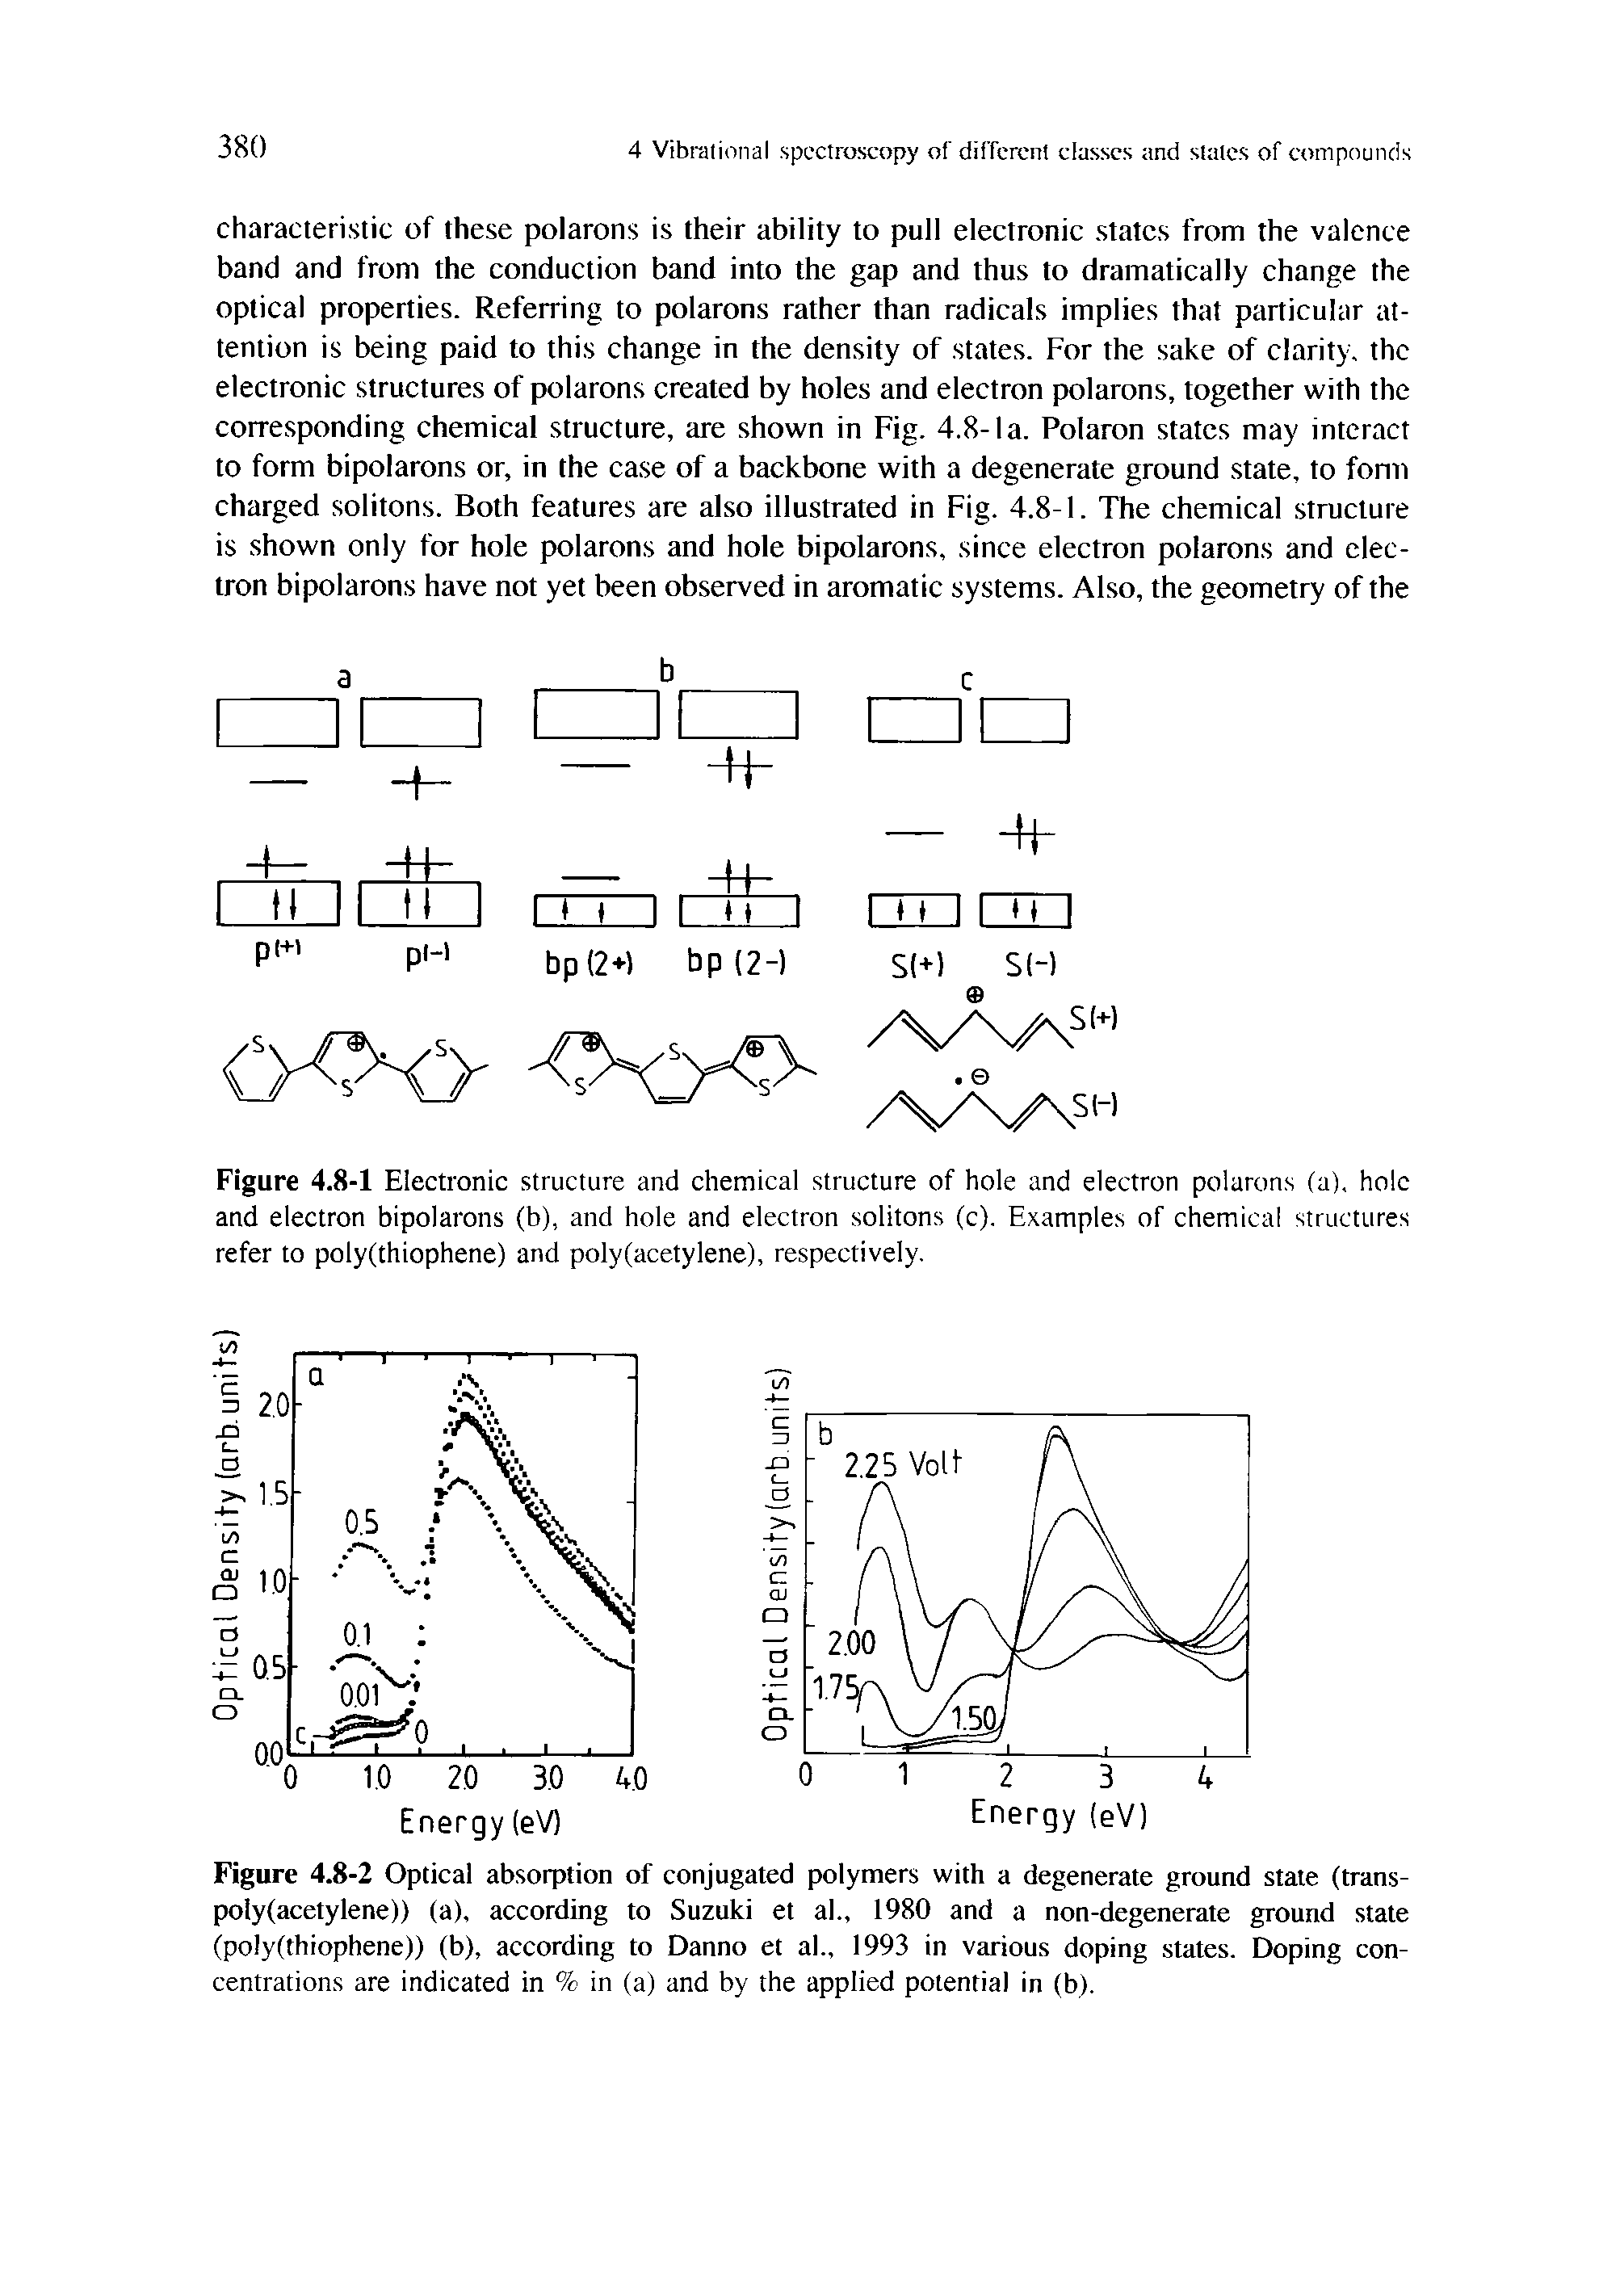 Figure 4.8-2 Optical absorption of conjugated polymers with a degenerate ground state (trans-poly(acetylene)) (a), according to Suzuki et ah, 1980 and a non-degenerate ground state (poly(thiophene)) (b), according to Danno et ah, 1993 in various doping states. Doping concentrations are indicated in % in (a) and by the applied potential in (b).